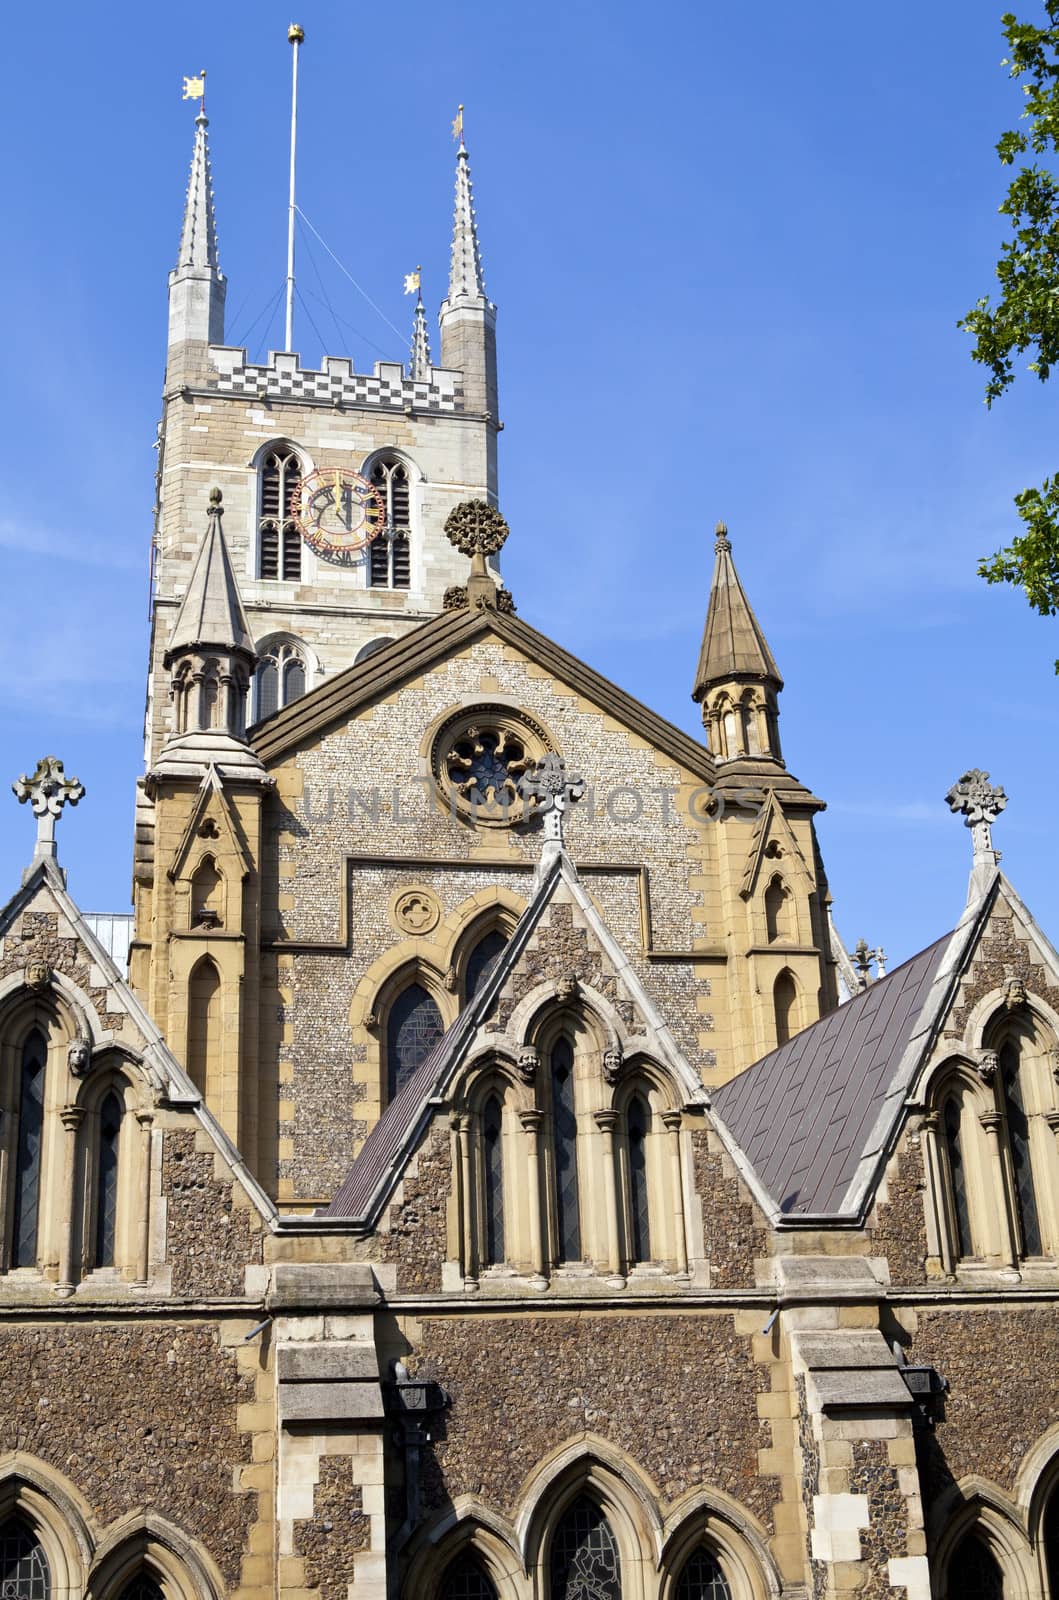 The historic Southwark Cathedral in London.